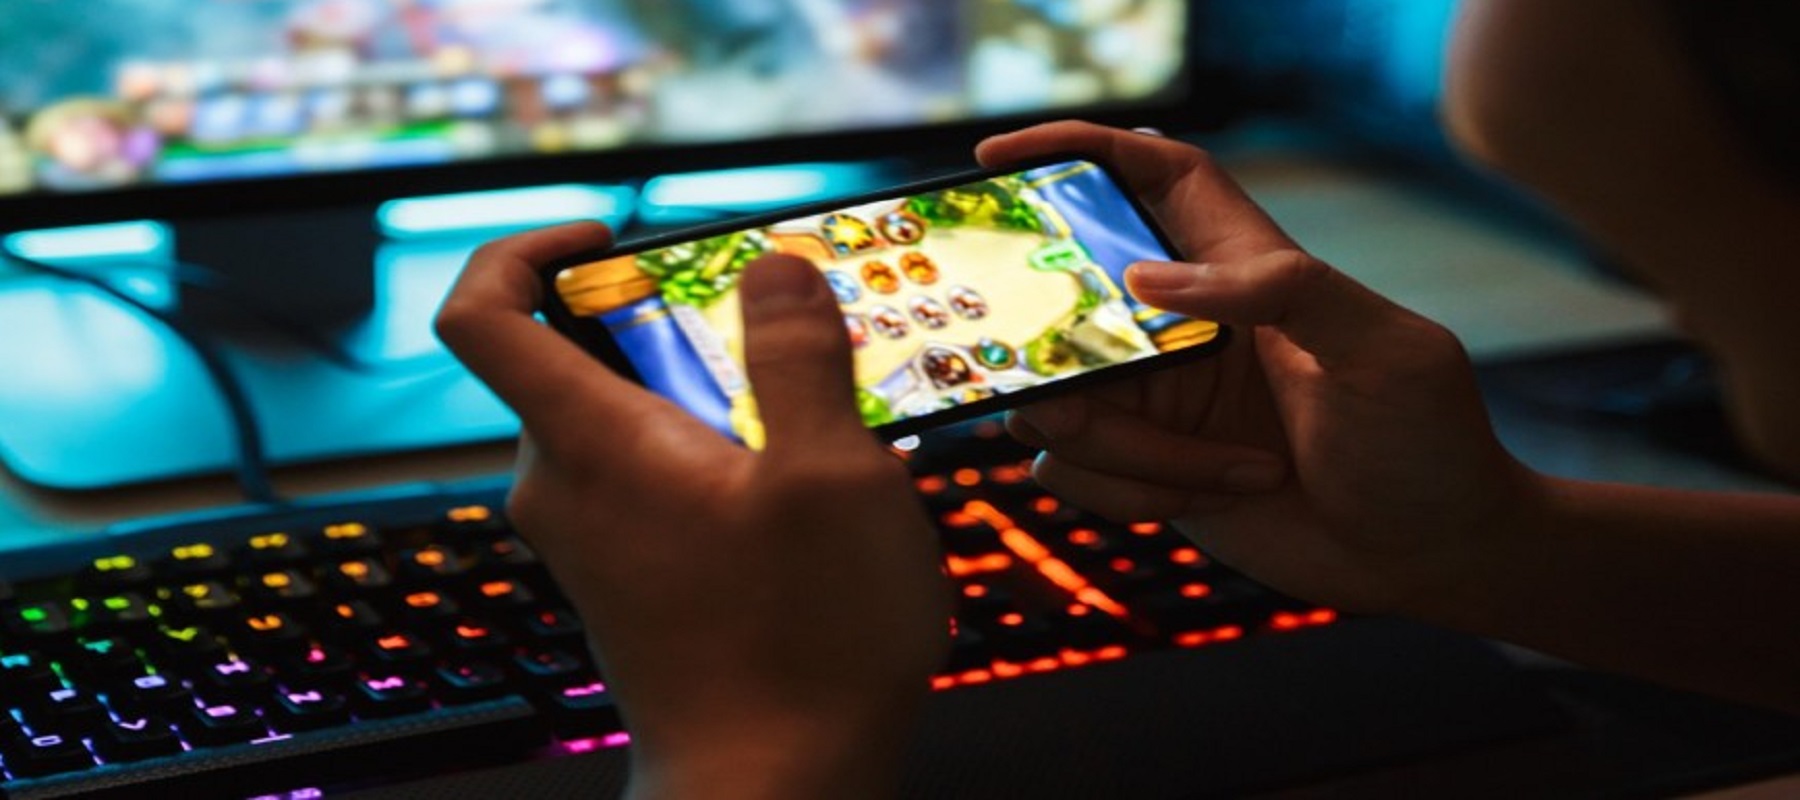 In-game advertising market to reach $17.6 billion by 2030, report